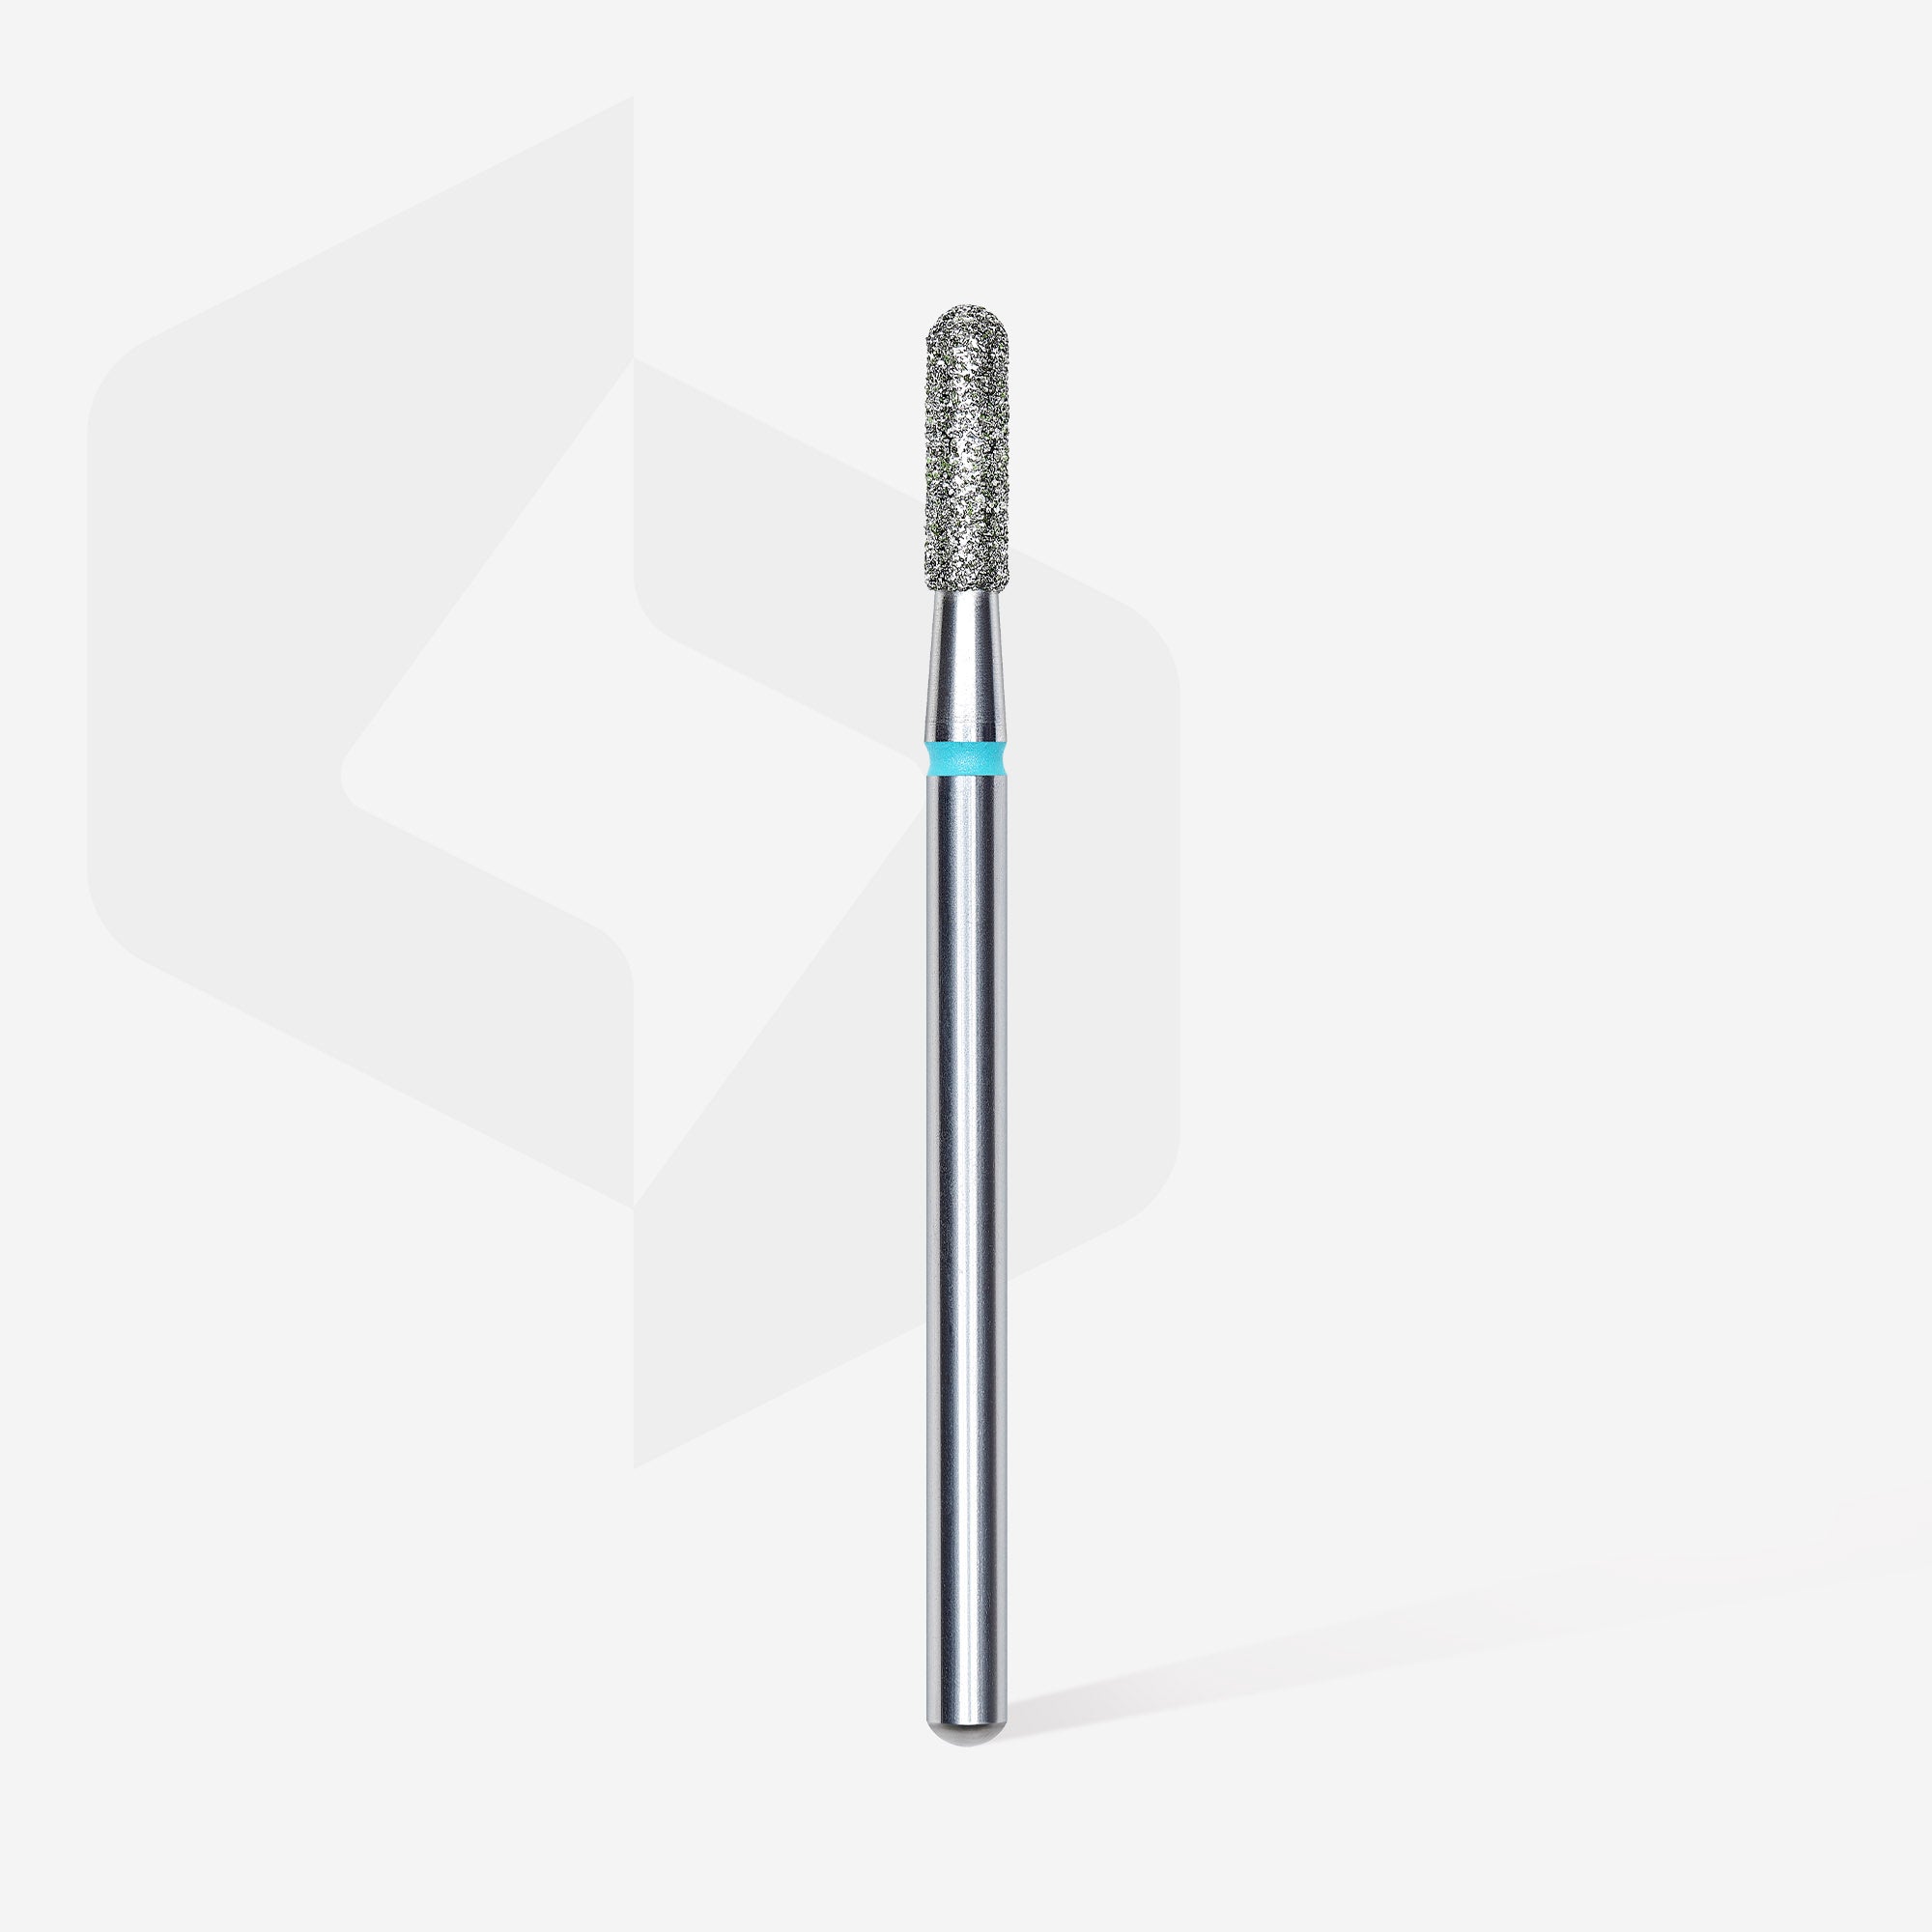 Diamond nail drill bit "rounded cylinder" blue